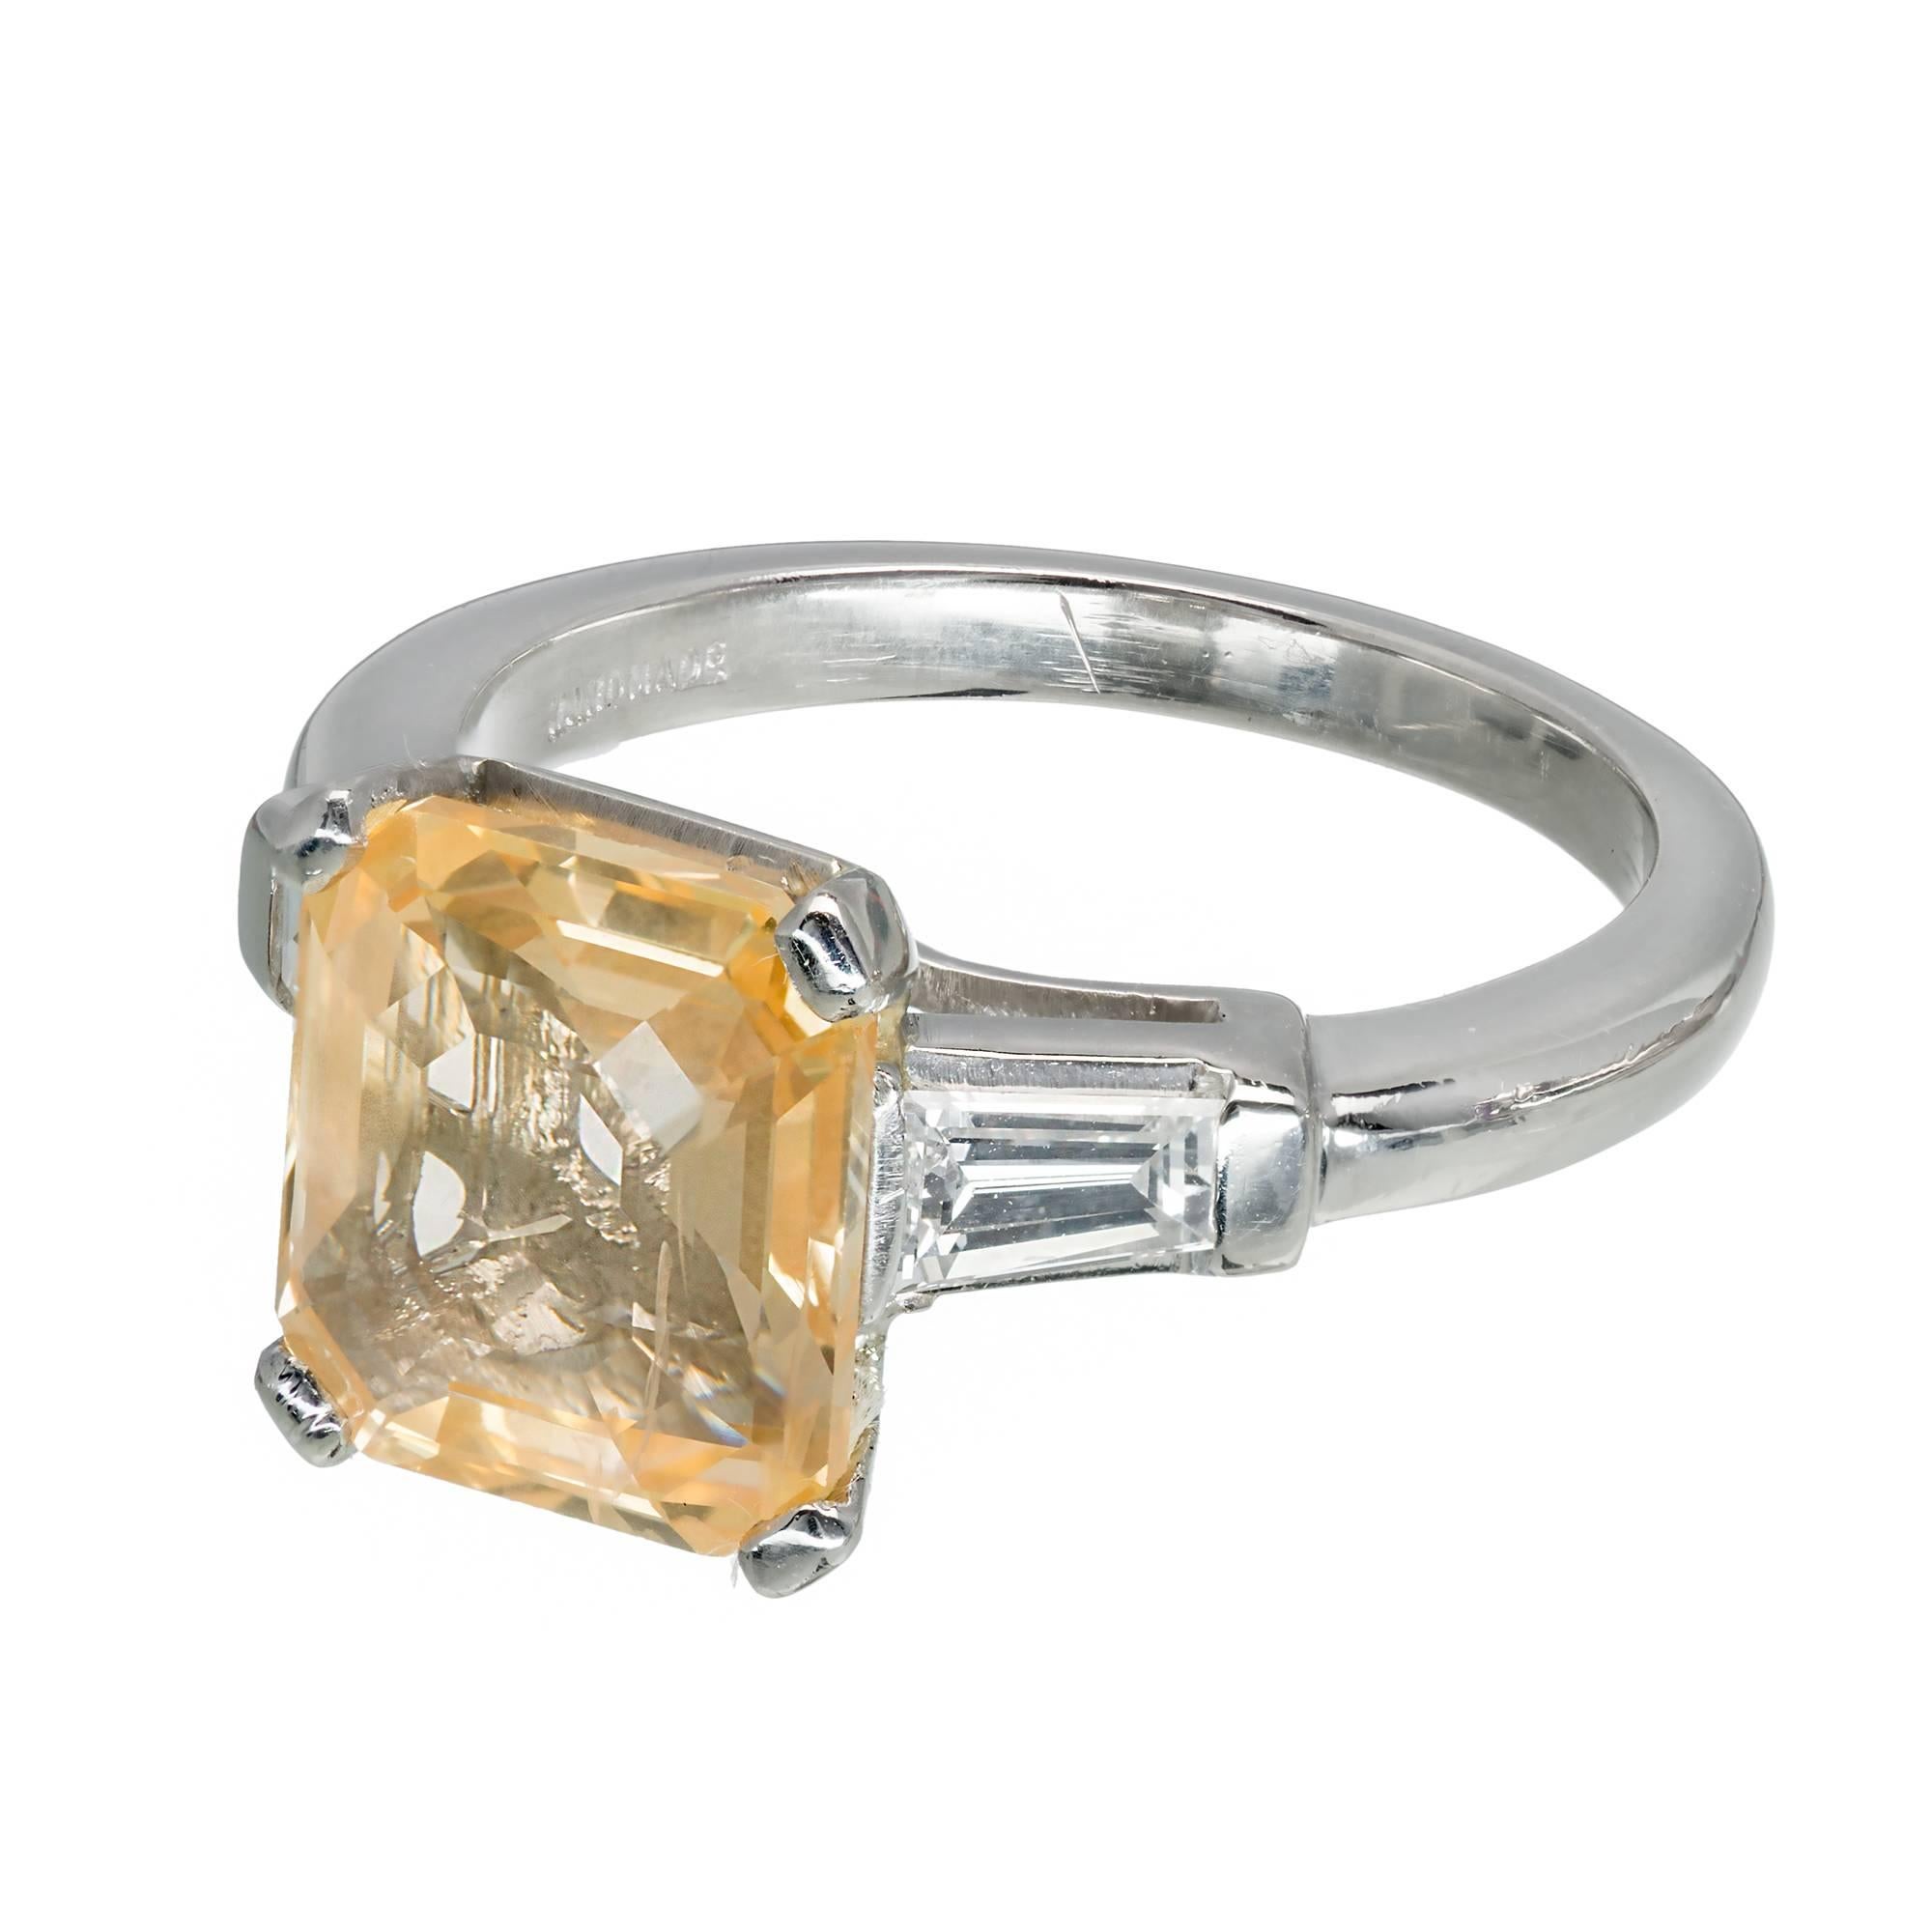 Three stone Natural orange yellow Emerald step cut Sapphire engagement ring. GIA certified in its original handmade Platinum setting with full size tapered baguette diamonds. Circa 1930-1940.

1 octagonal step cut orangey yellow Sapphire, approx.